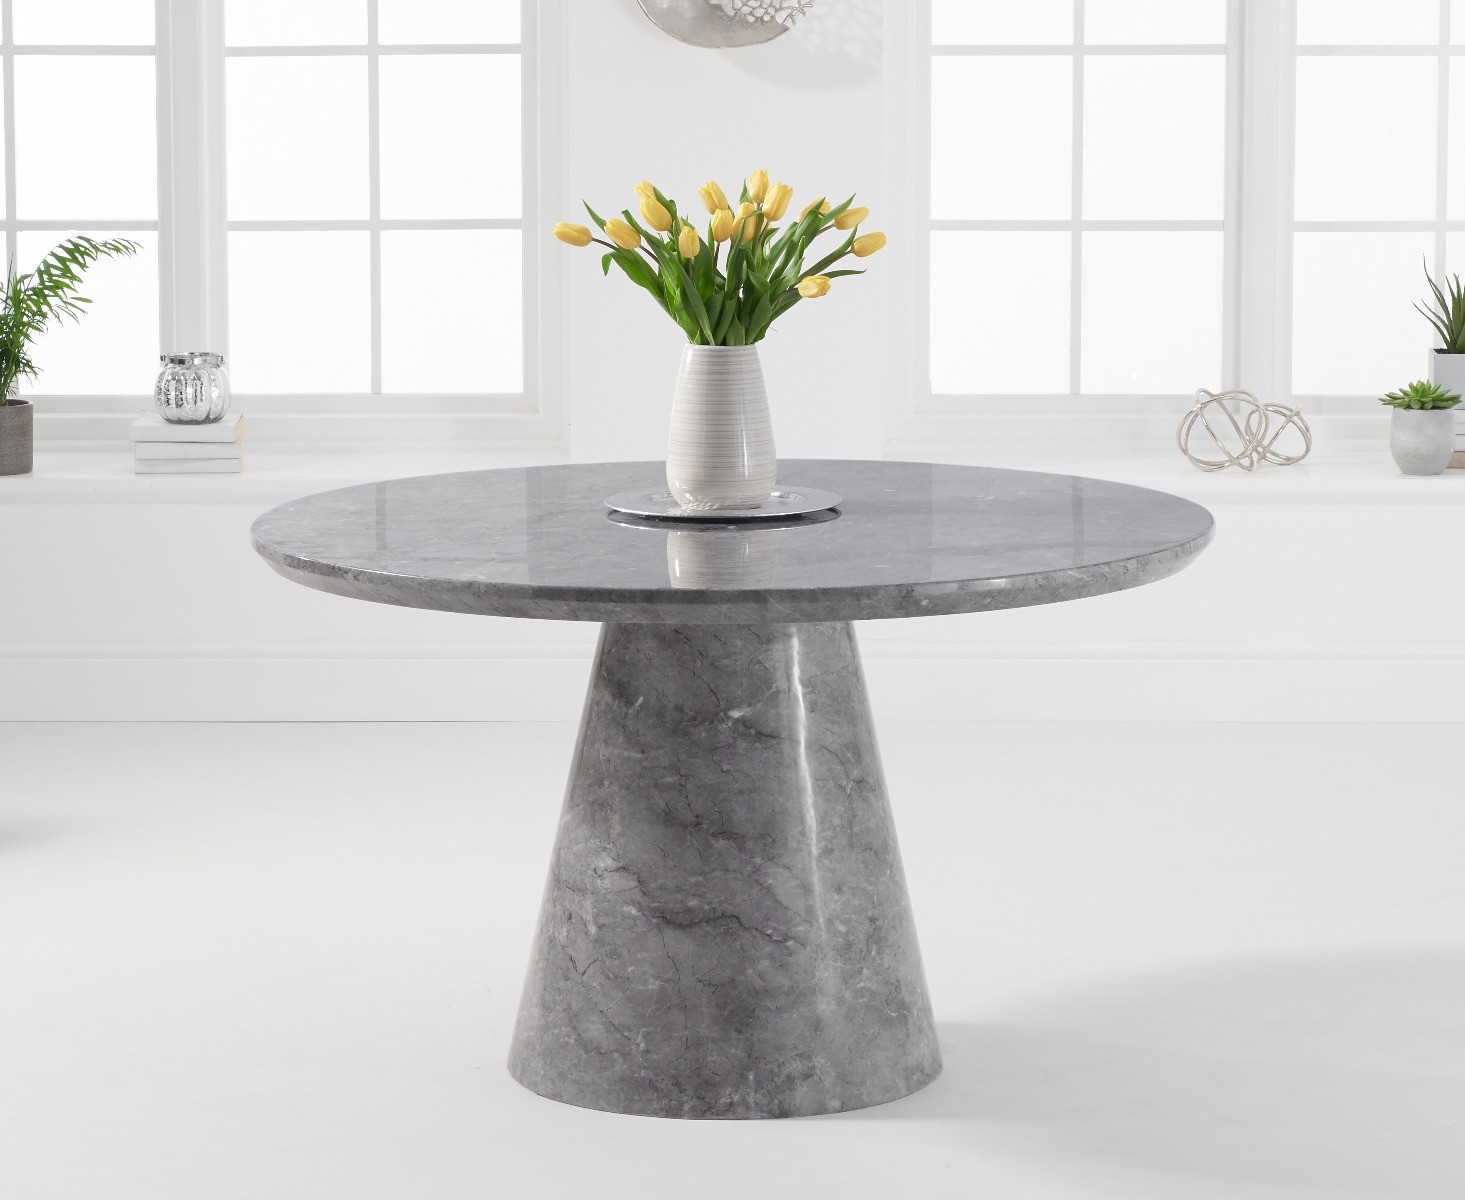 Photo 2 of Ravello 130cm round grey marble dining table with 6 grey sophia chairs